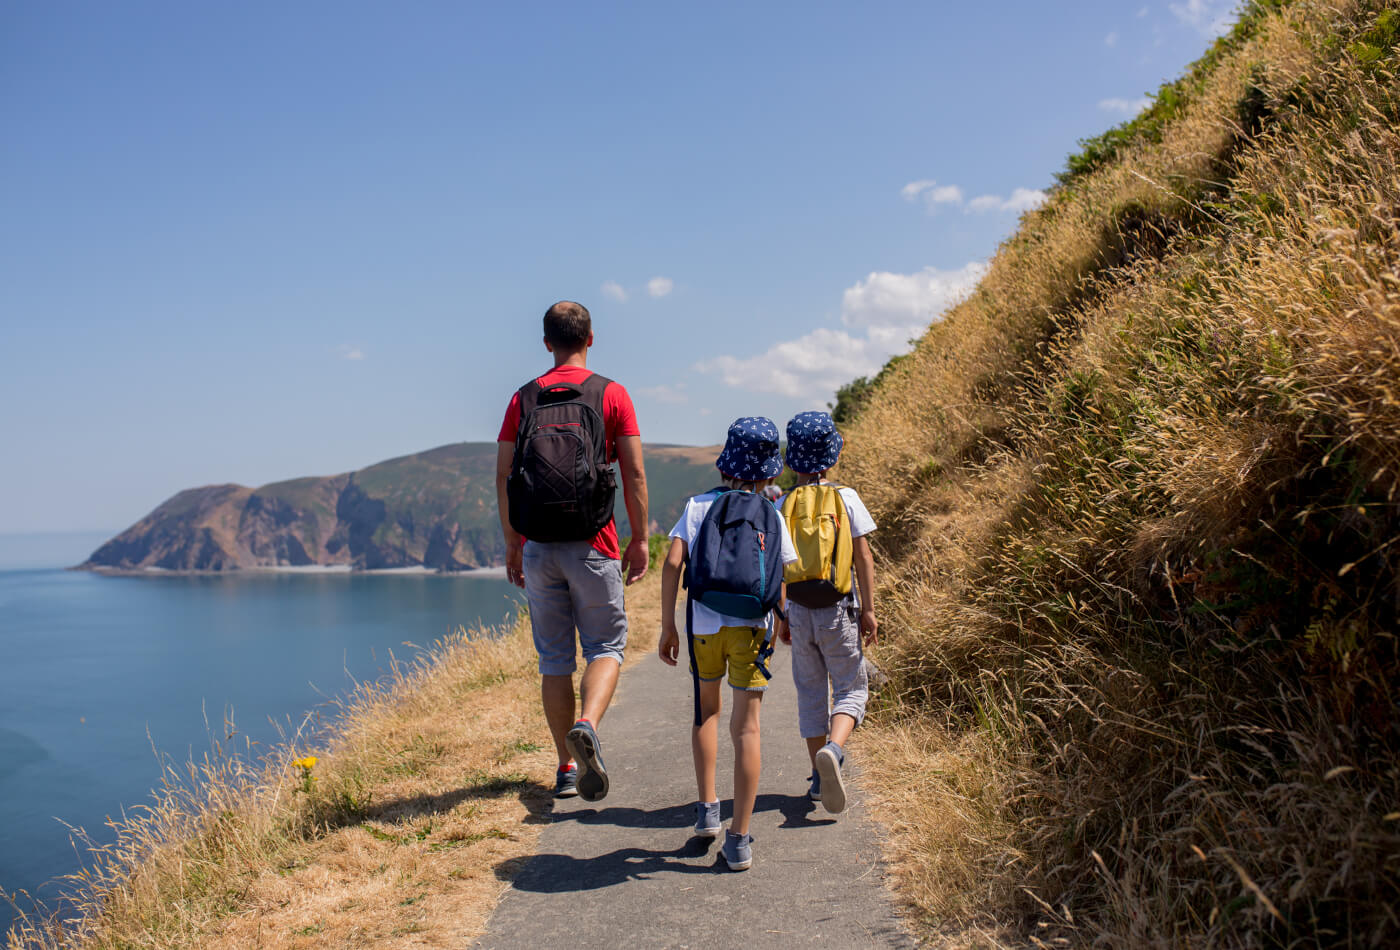 A father and two young children walking along a coastal path with cliffs in the far distance